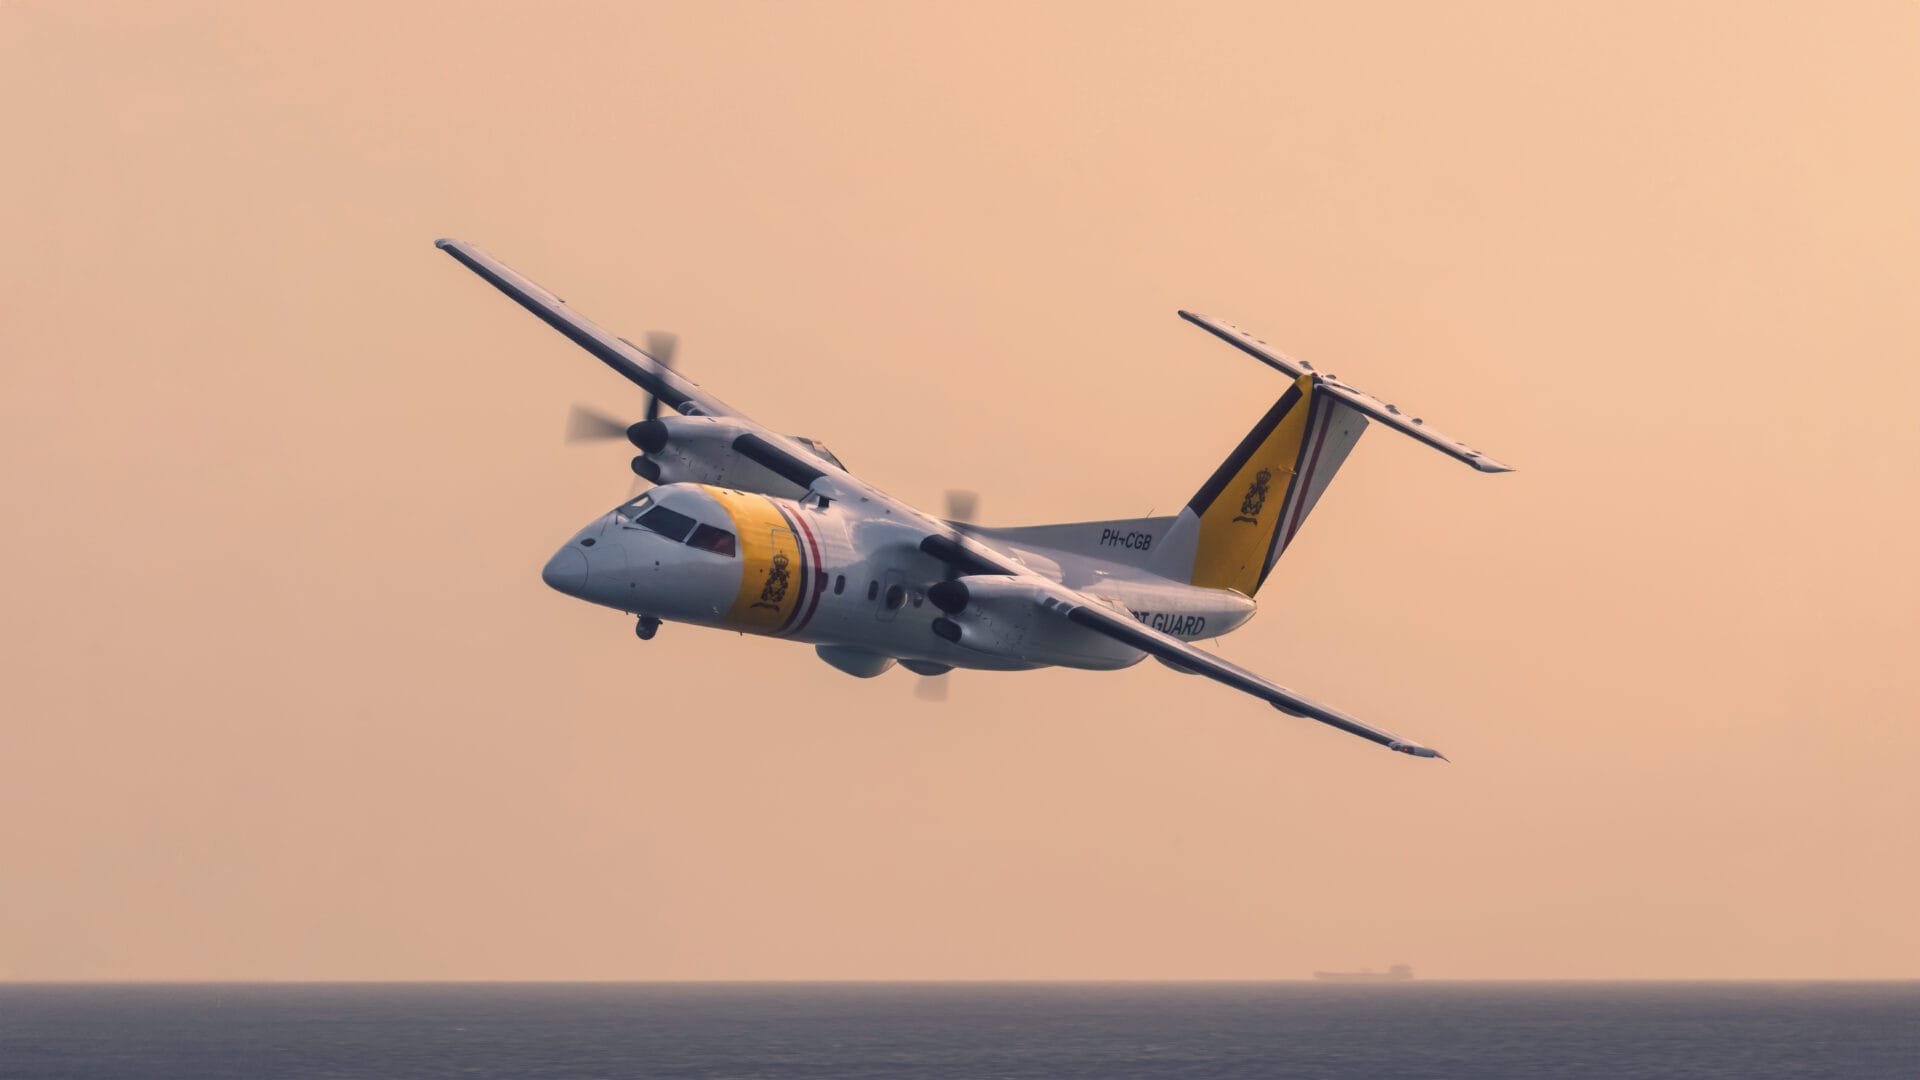 Photograph of the PH-CGB aircraft by The Dutch Caribbean Coast Guard flying at Sunrise